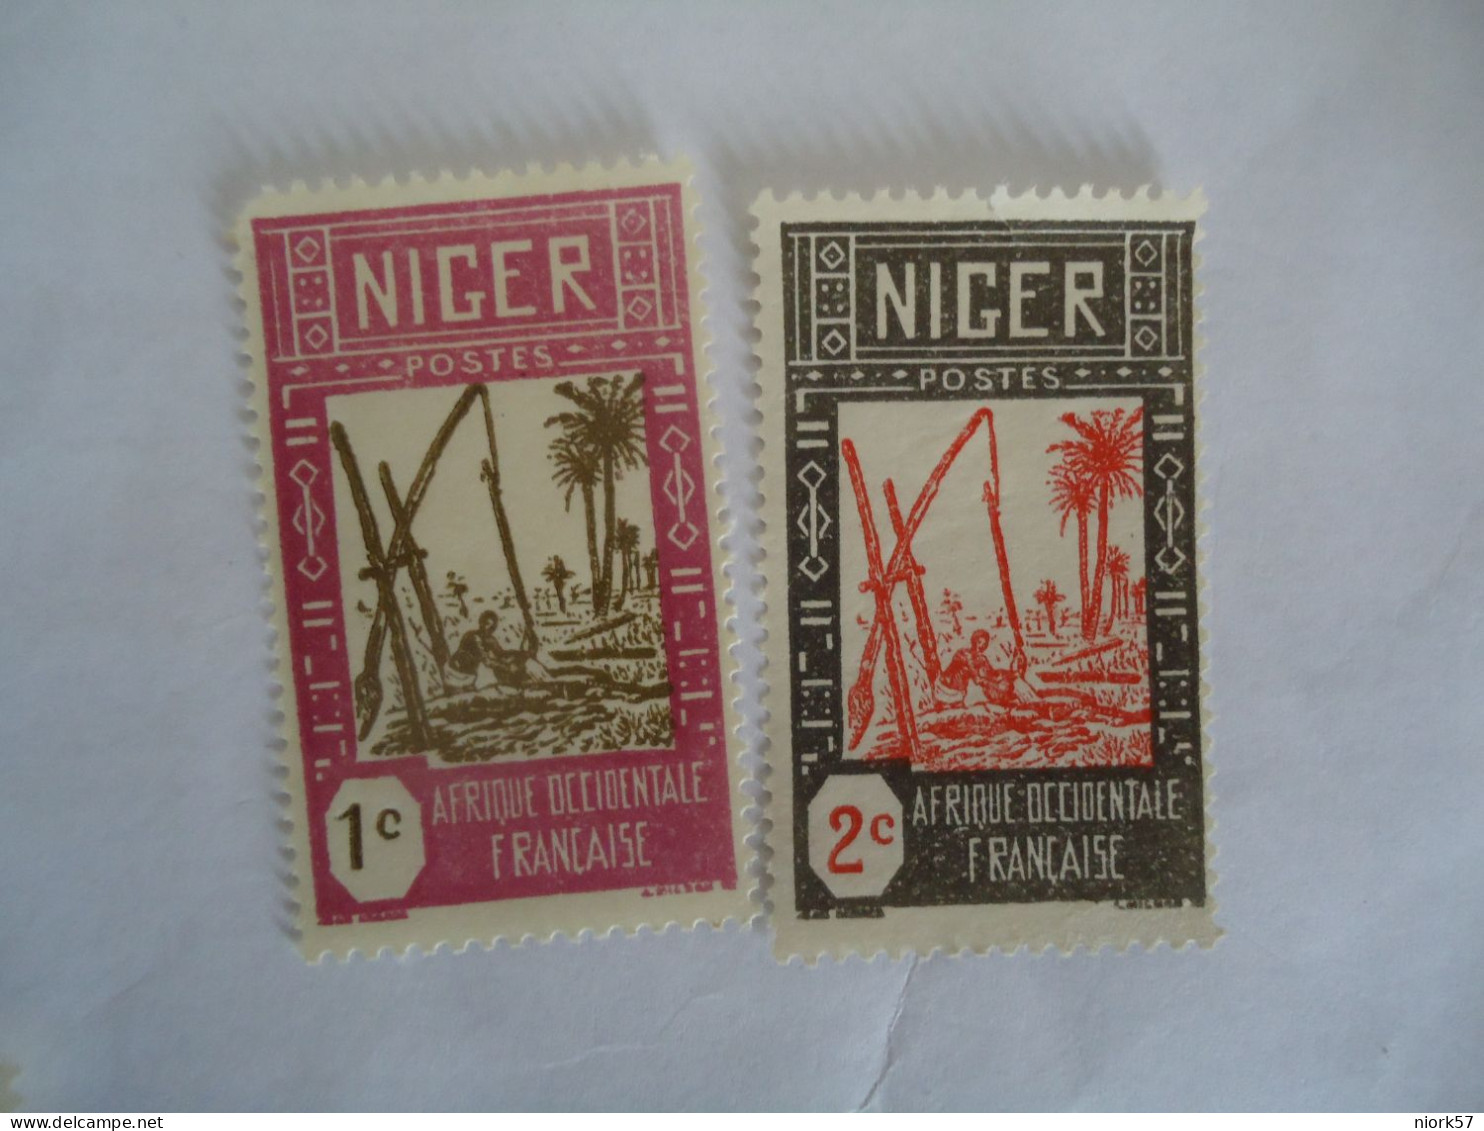 NIGER MLN 2 STAMPS WORKERS - Neufs